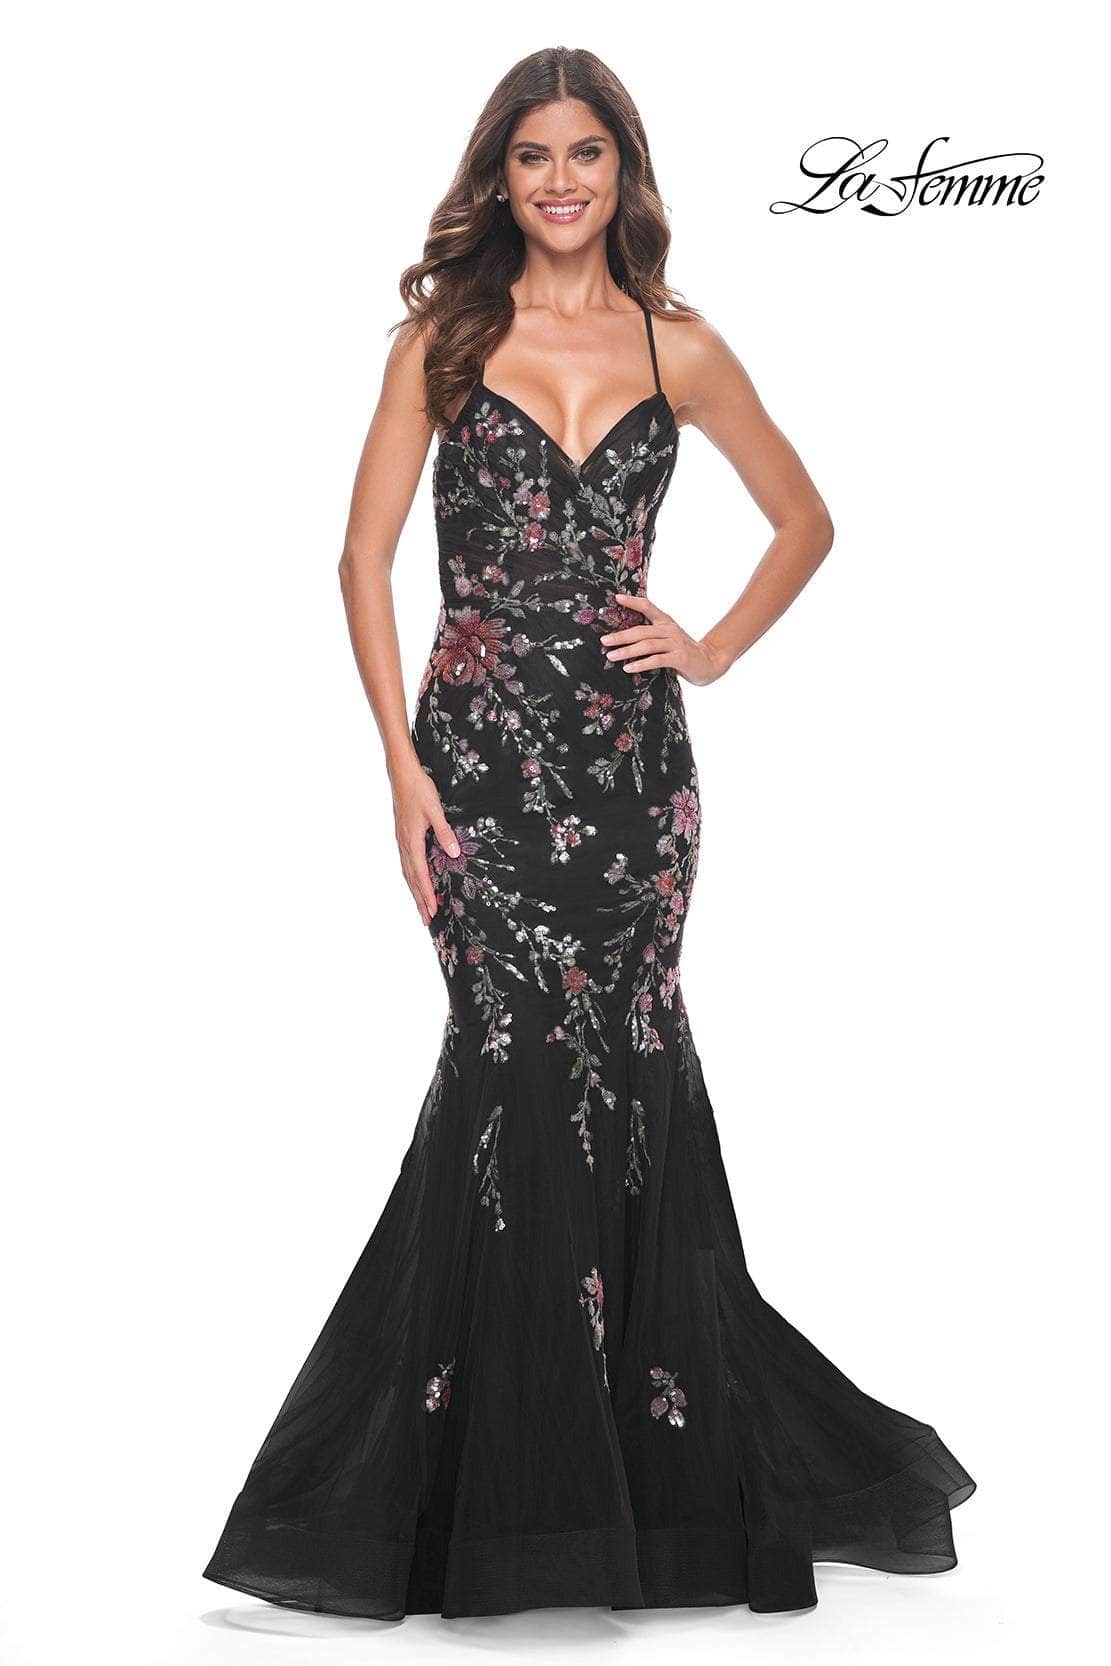 La Femme 32246 - Lace-Up Back Mermaid Prom Gown
